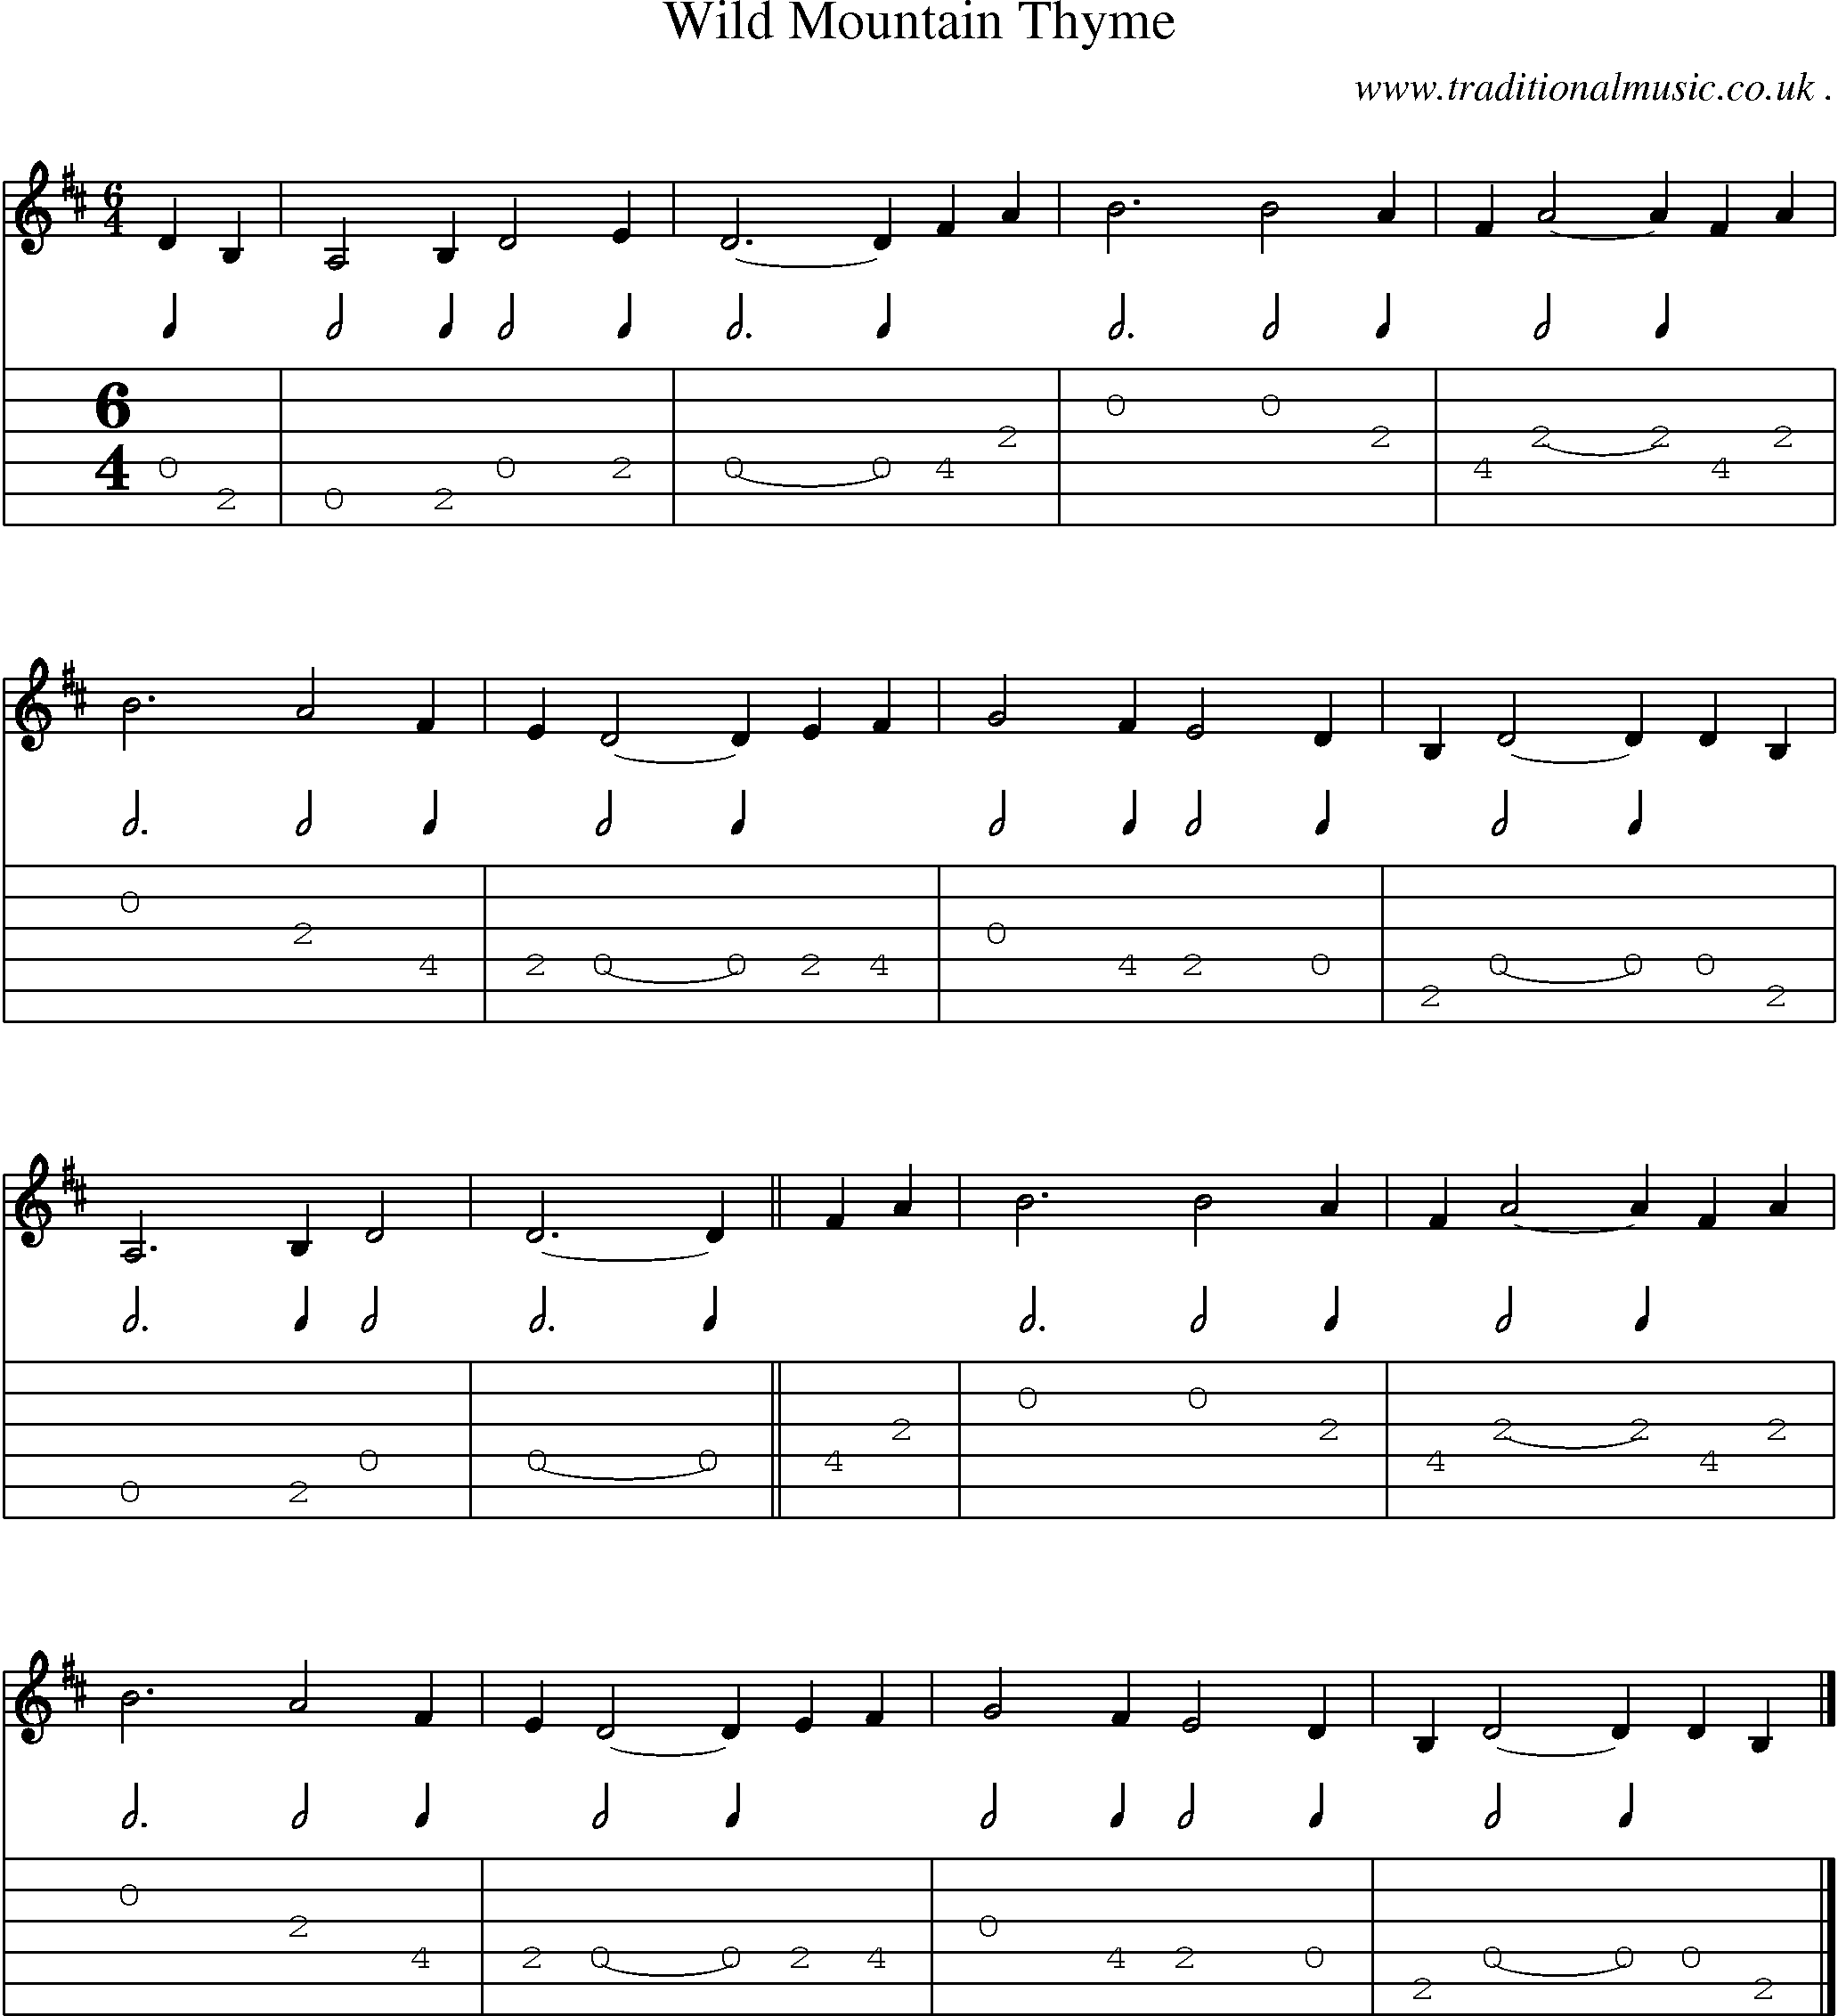 Sheet-music  score, Chords and Guitar Tabs for Wild Mountain Thyme